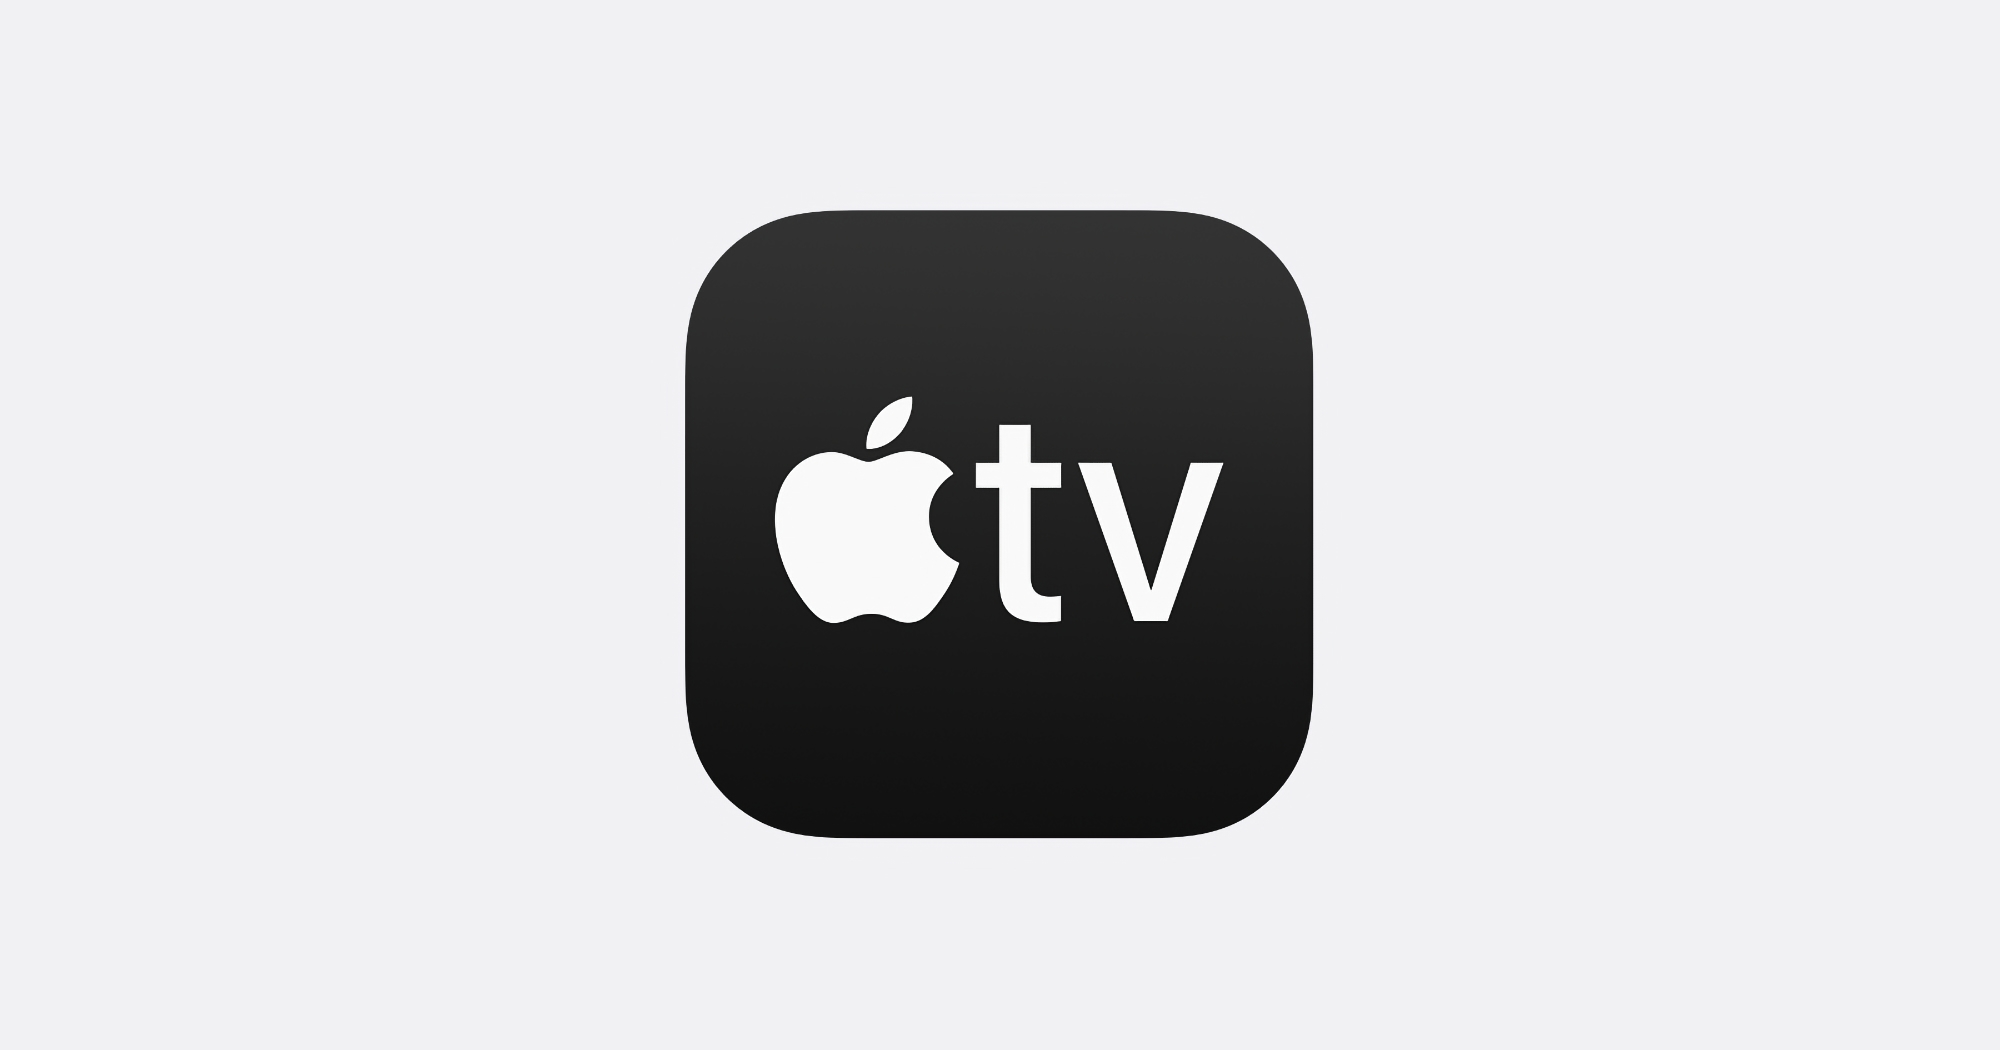 Insider: Apple TV will appear on Android, the app is now being tested